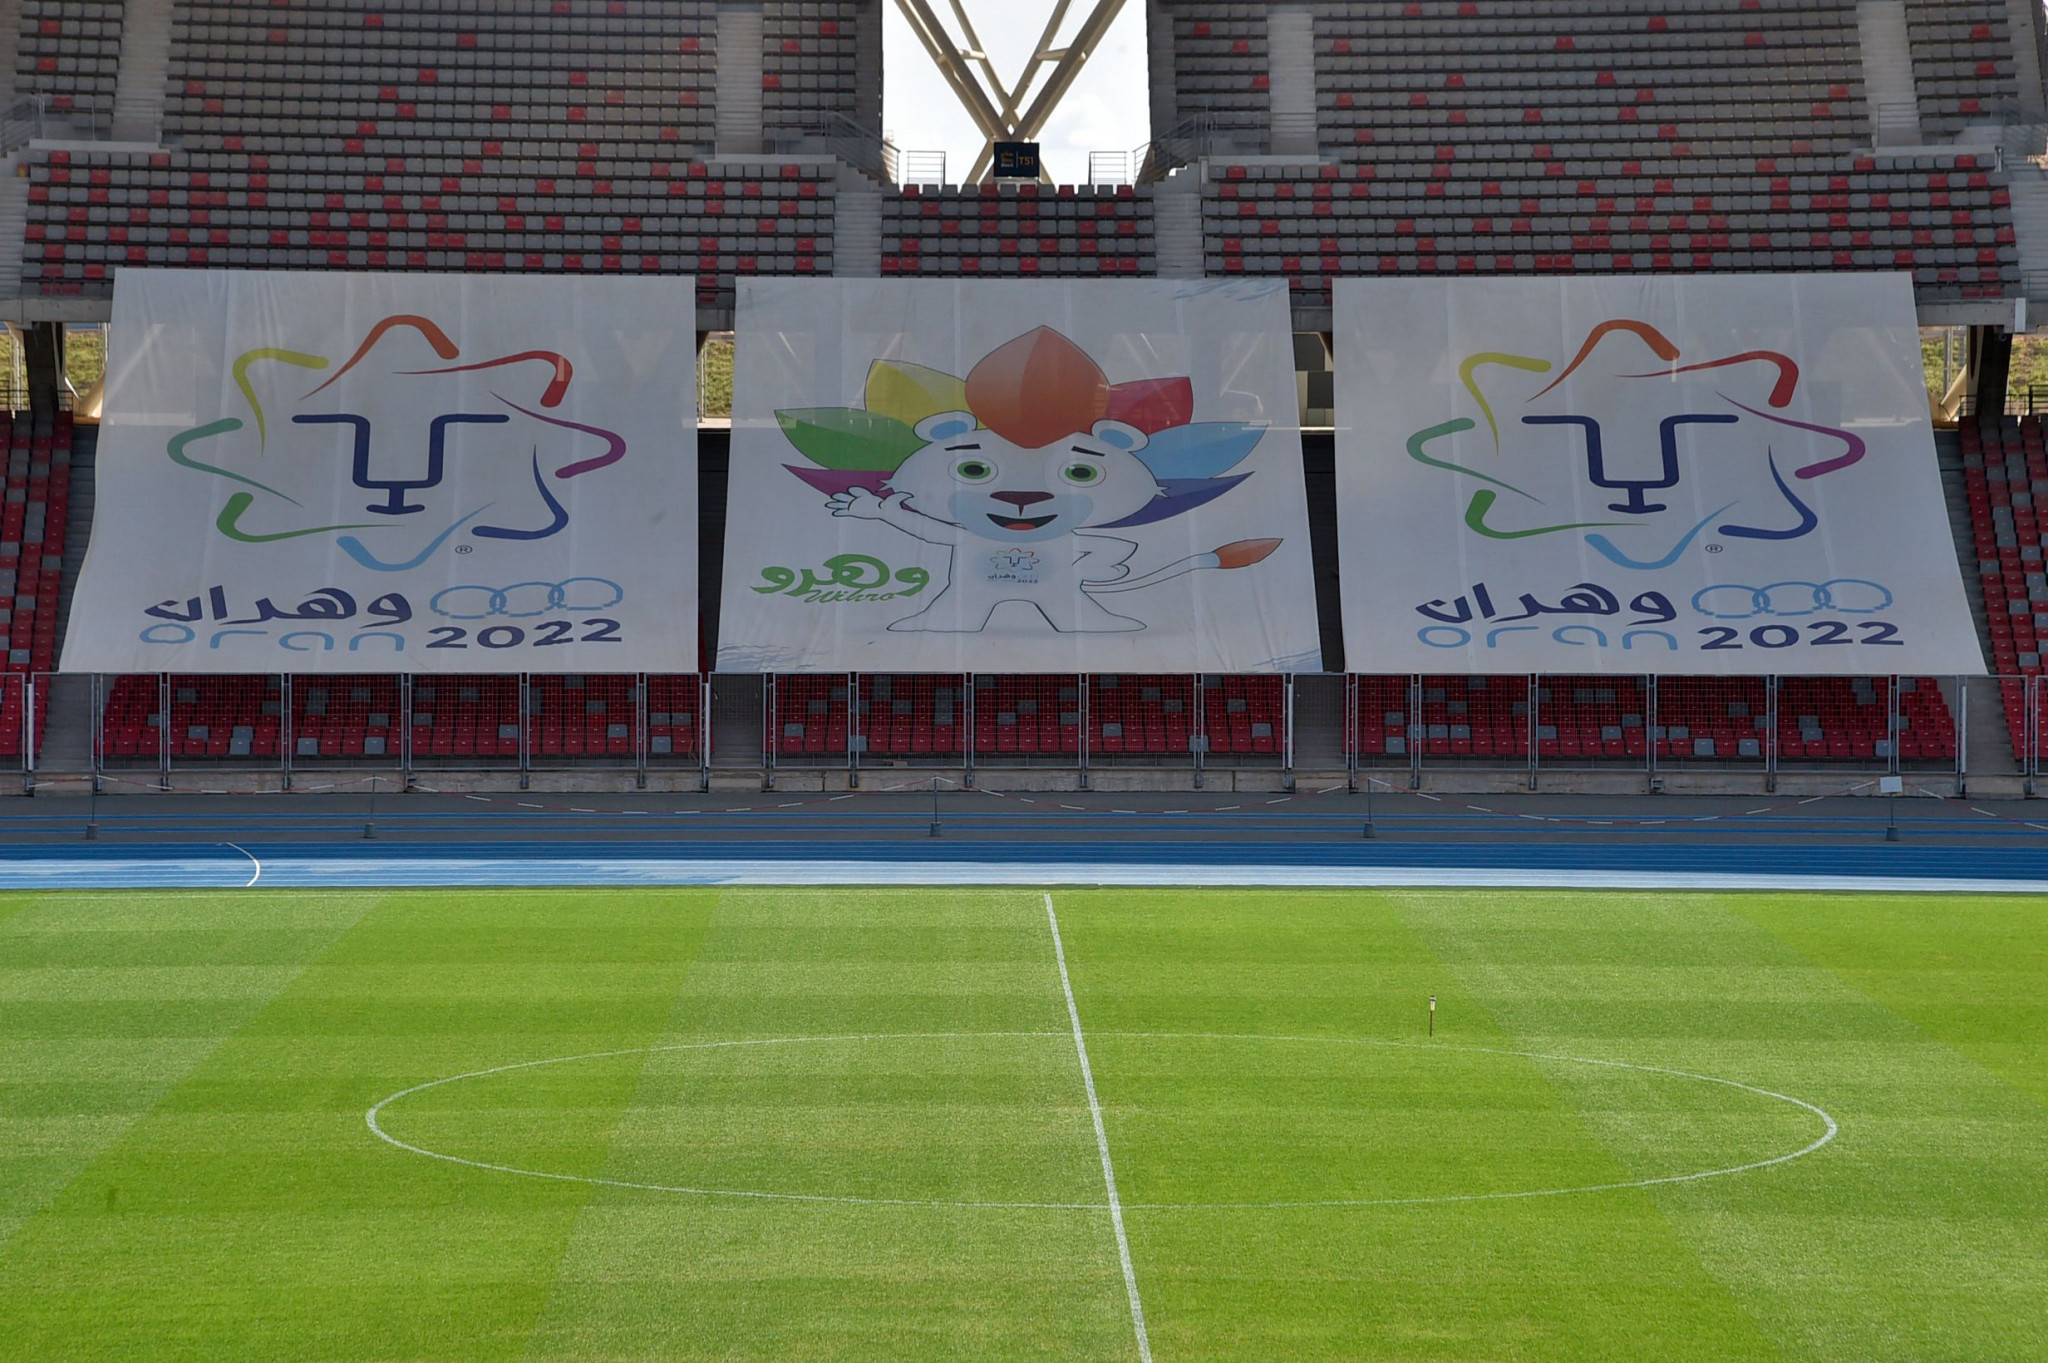 Bernard Amsalem is confident that the Oran 2022 Mediterranean Games will be a success ©Getty Images